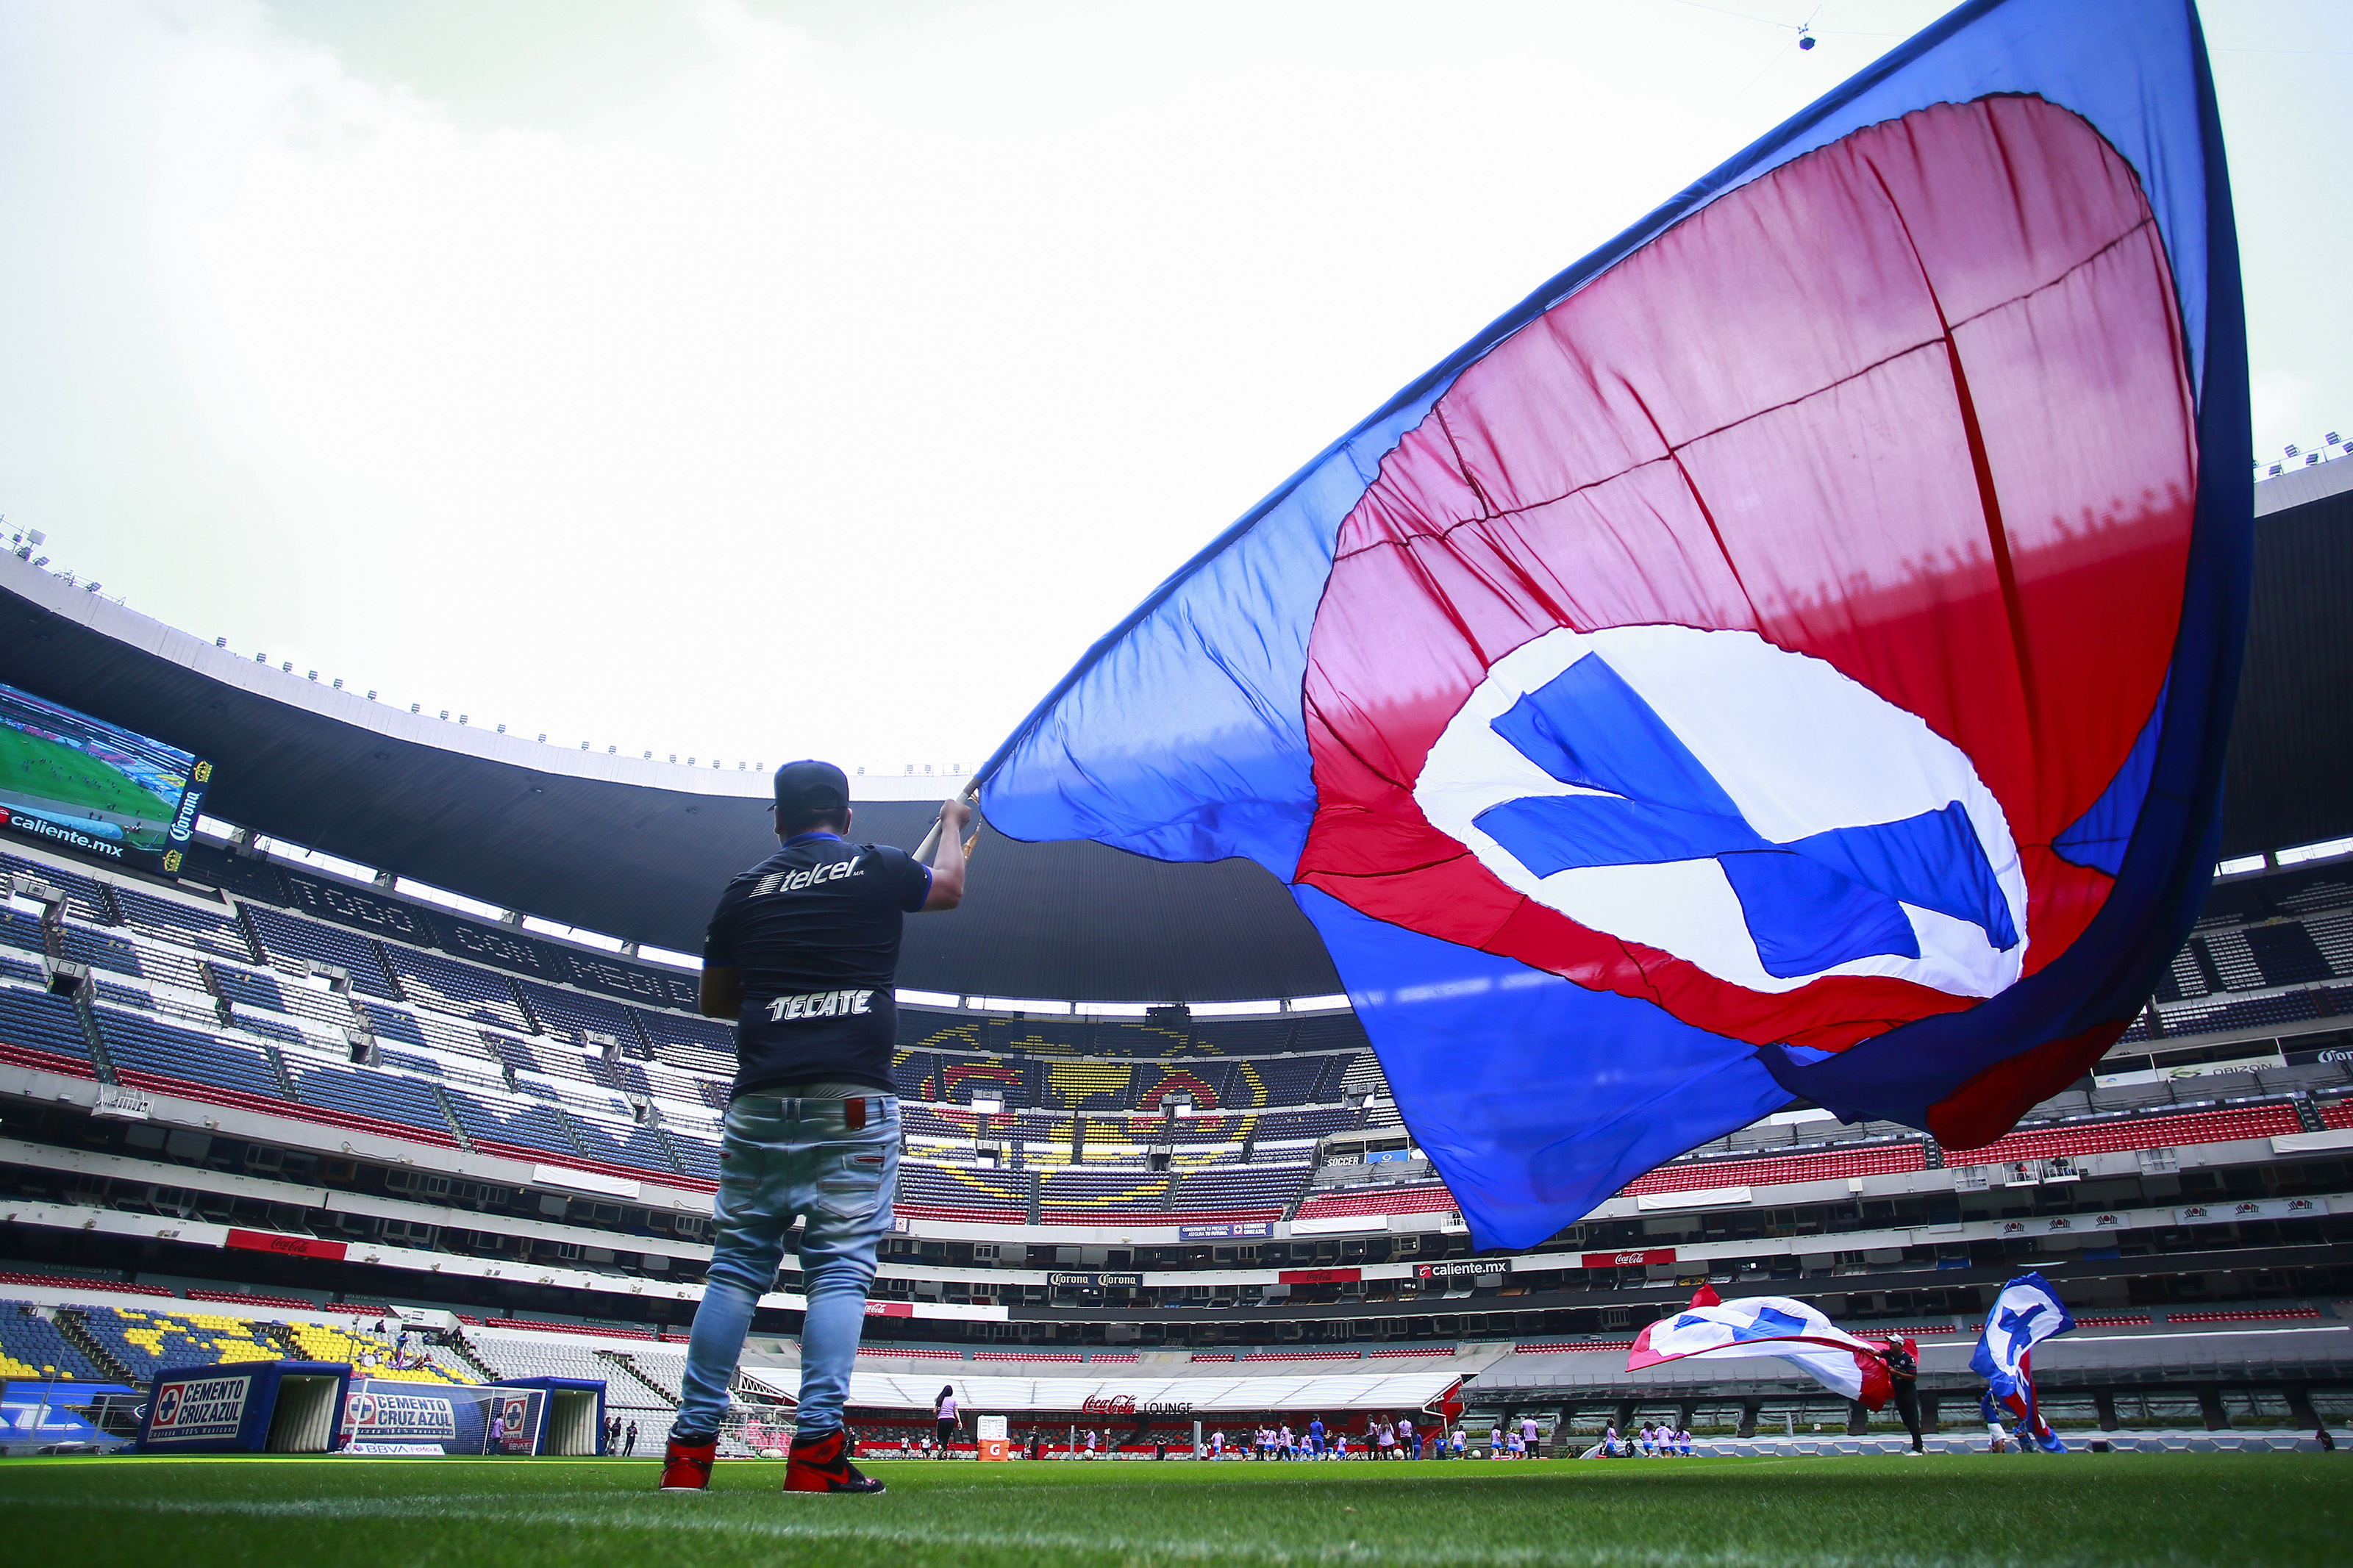 General view of the Azteca stadium with a person waving a large Cruz Azul flag while on the pitch prior a quarterfinal match between Cruz Azul and Chivas as part of Torneo Apertura Liga MX Femenil at Estadio Azteca on October 27, 2022 in Mexico City, Mexico.